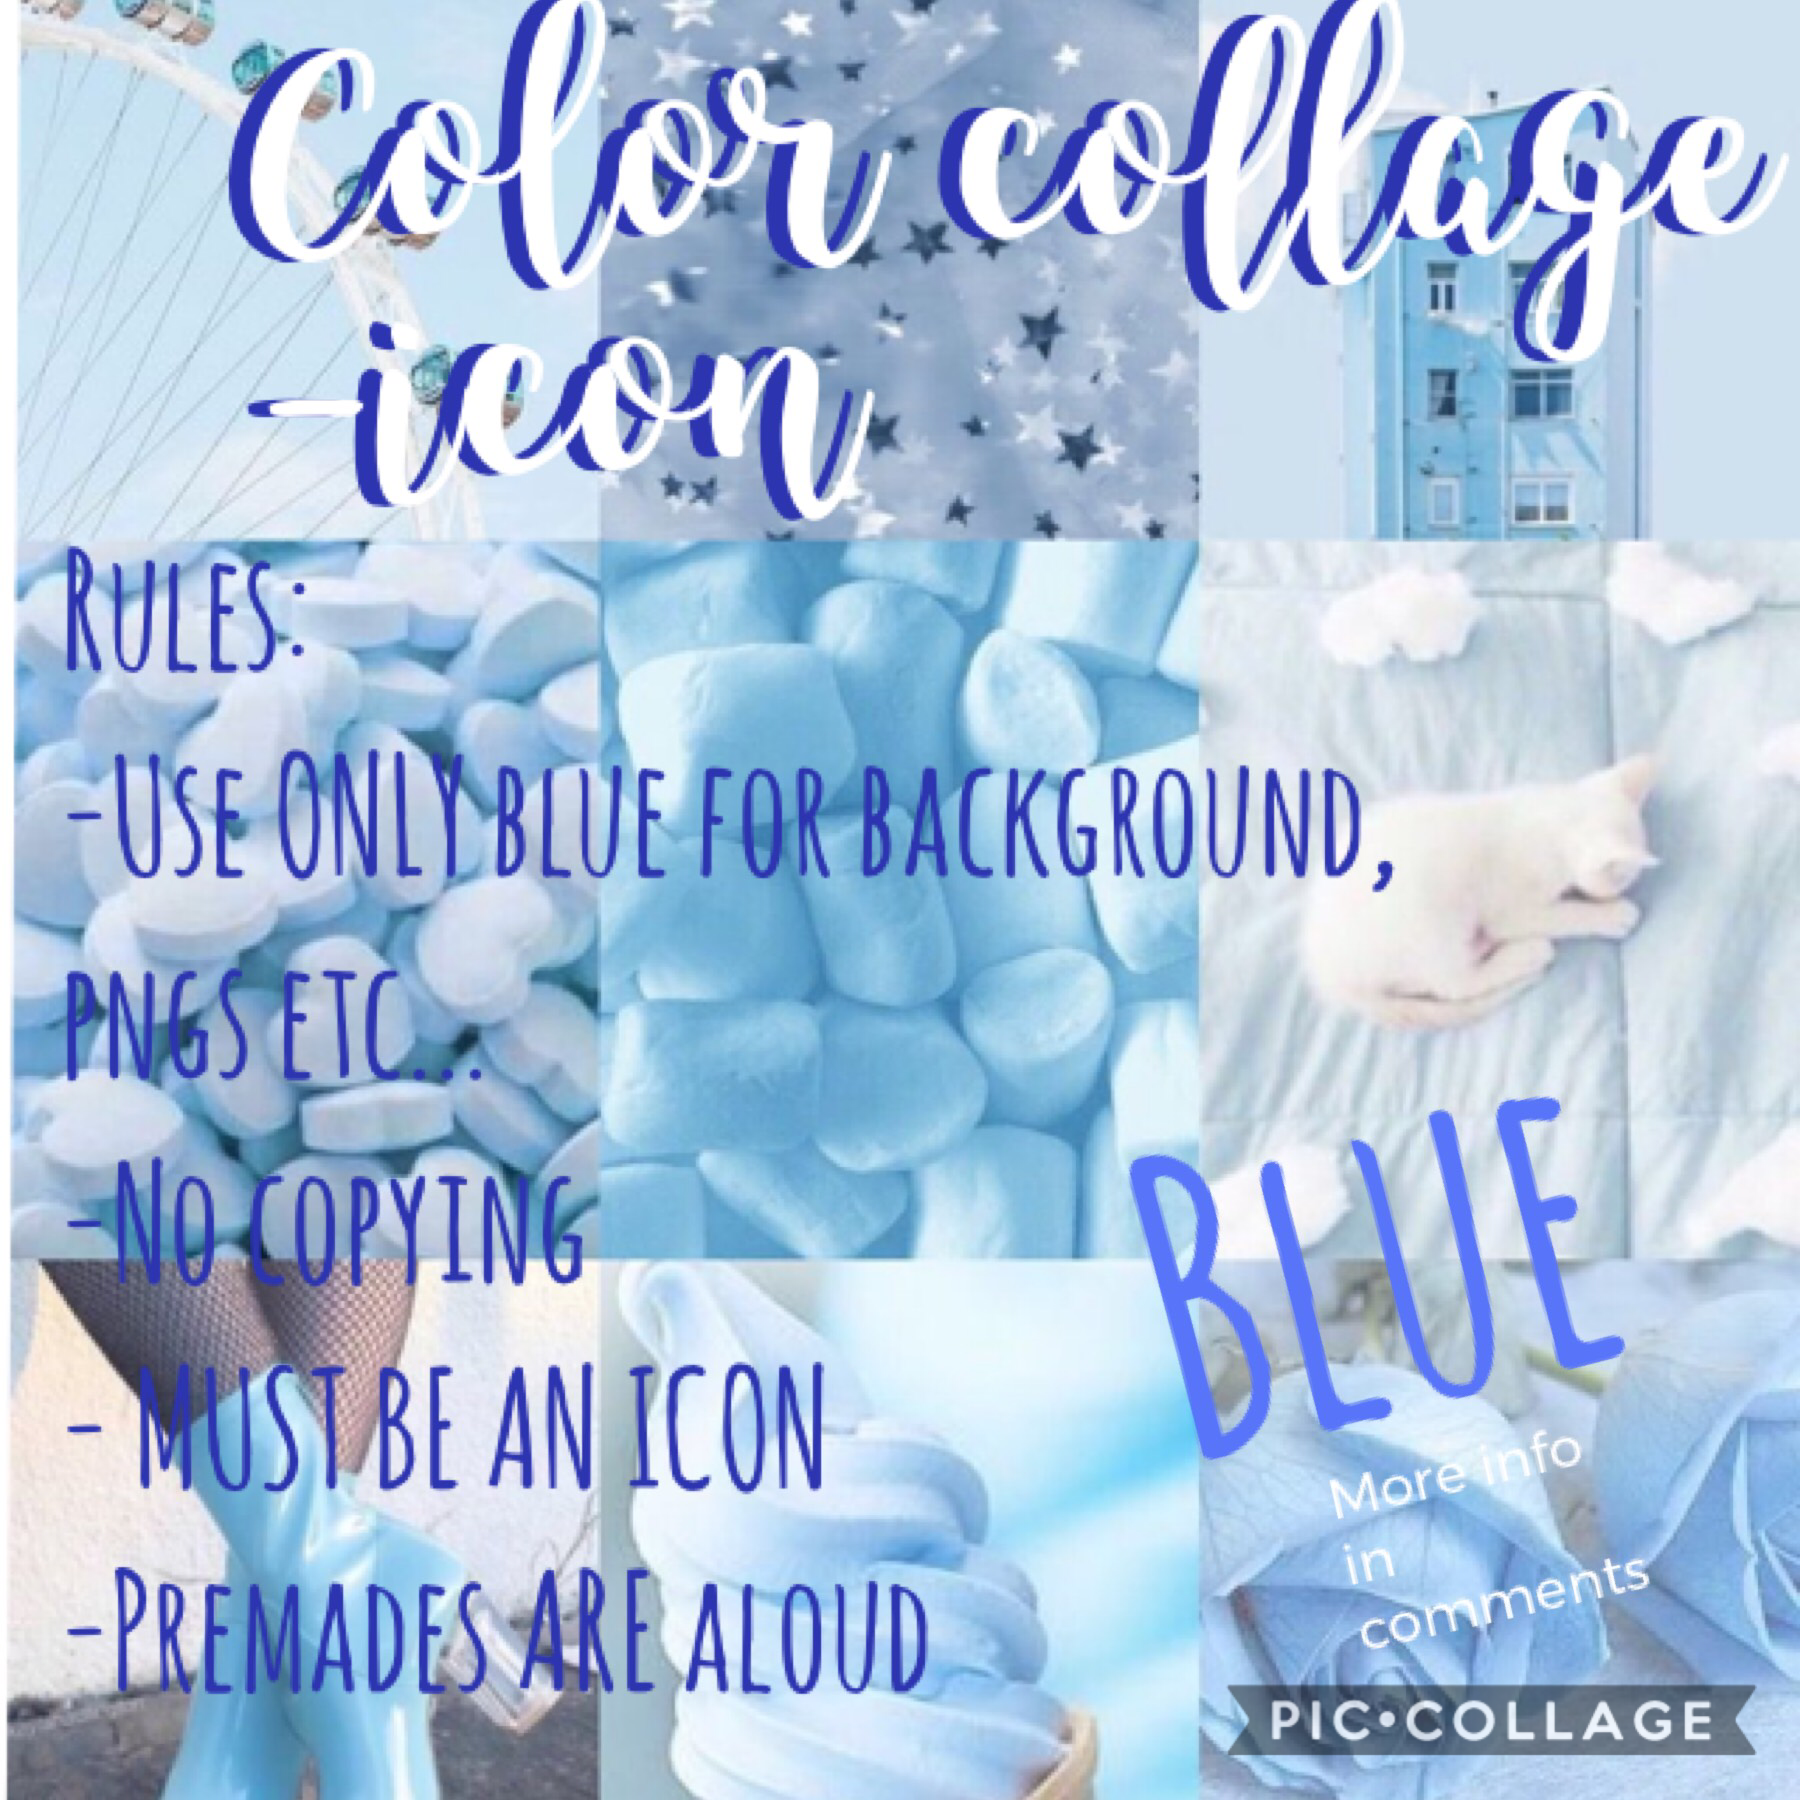 🌊Tap🌊

Round three!! Make sure to do an icon NOT a collage 💙